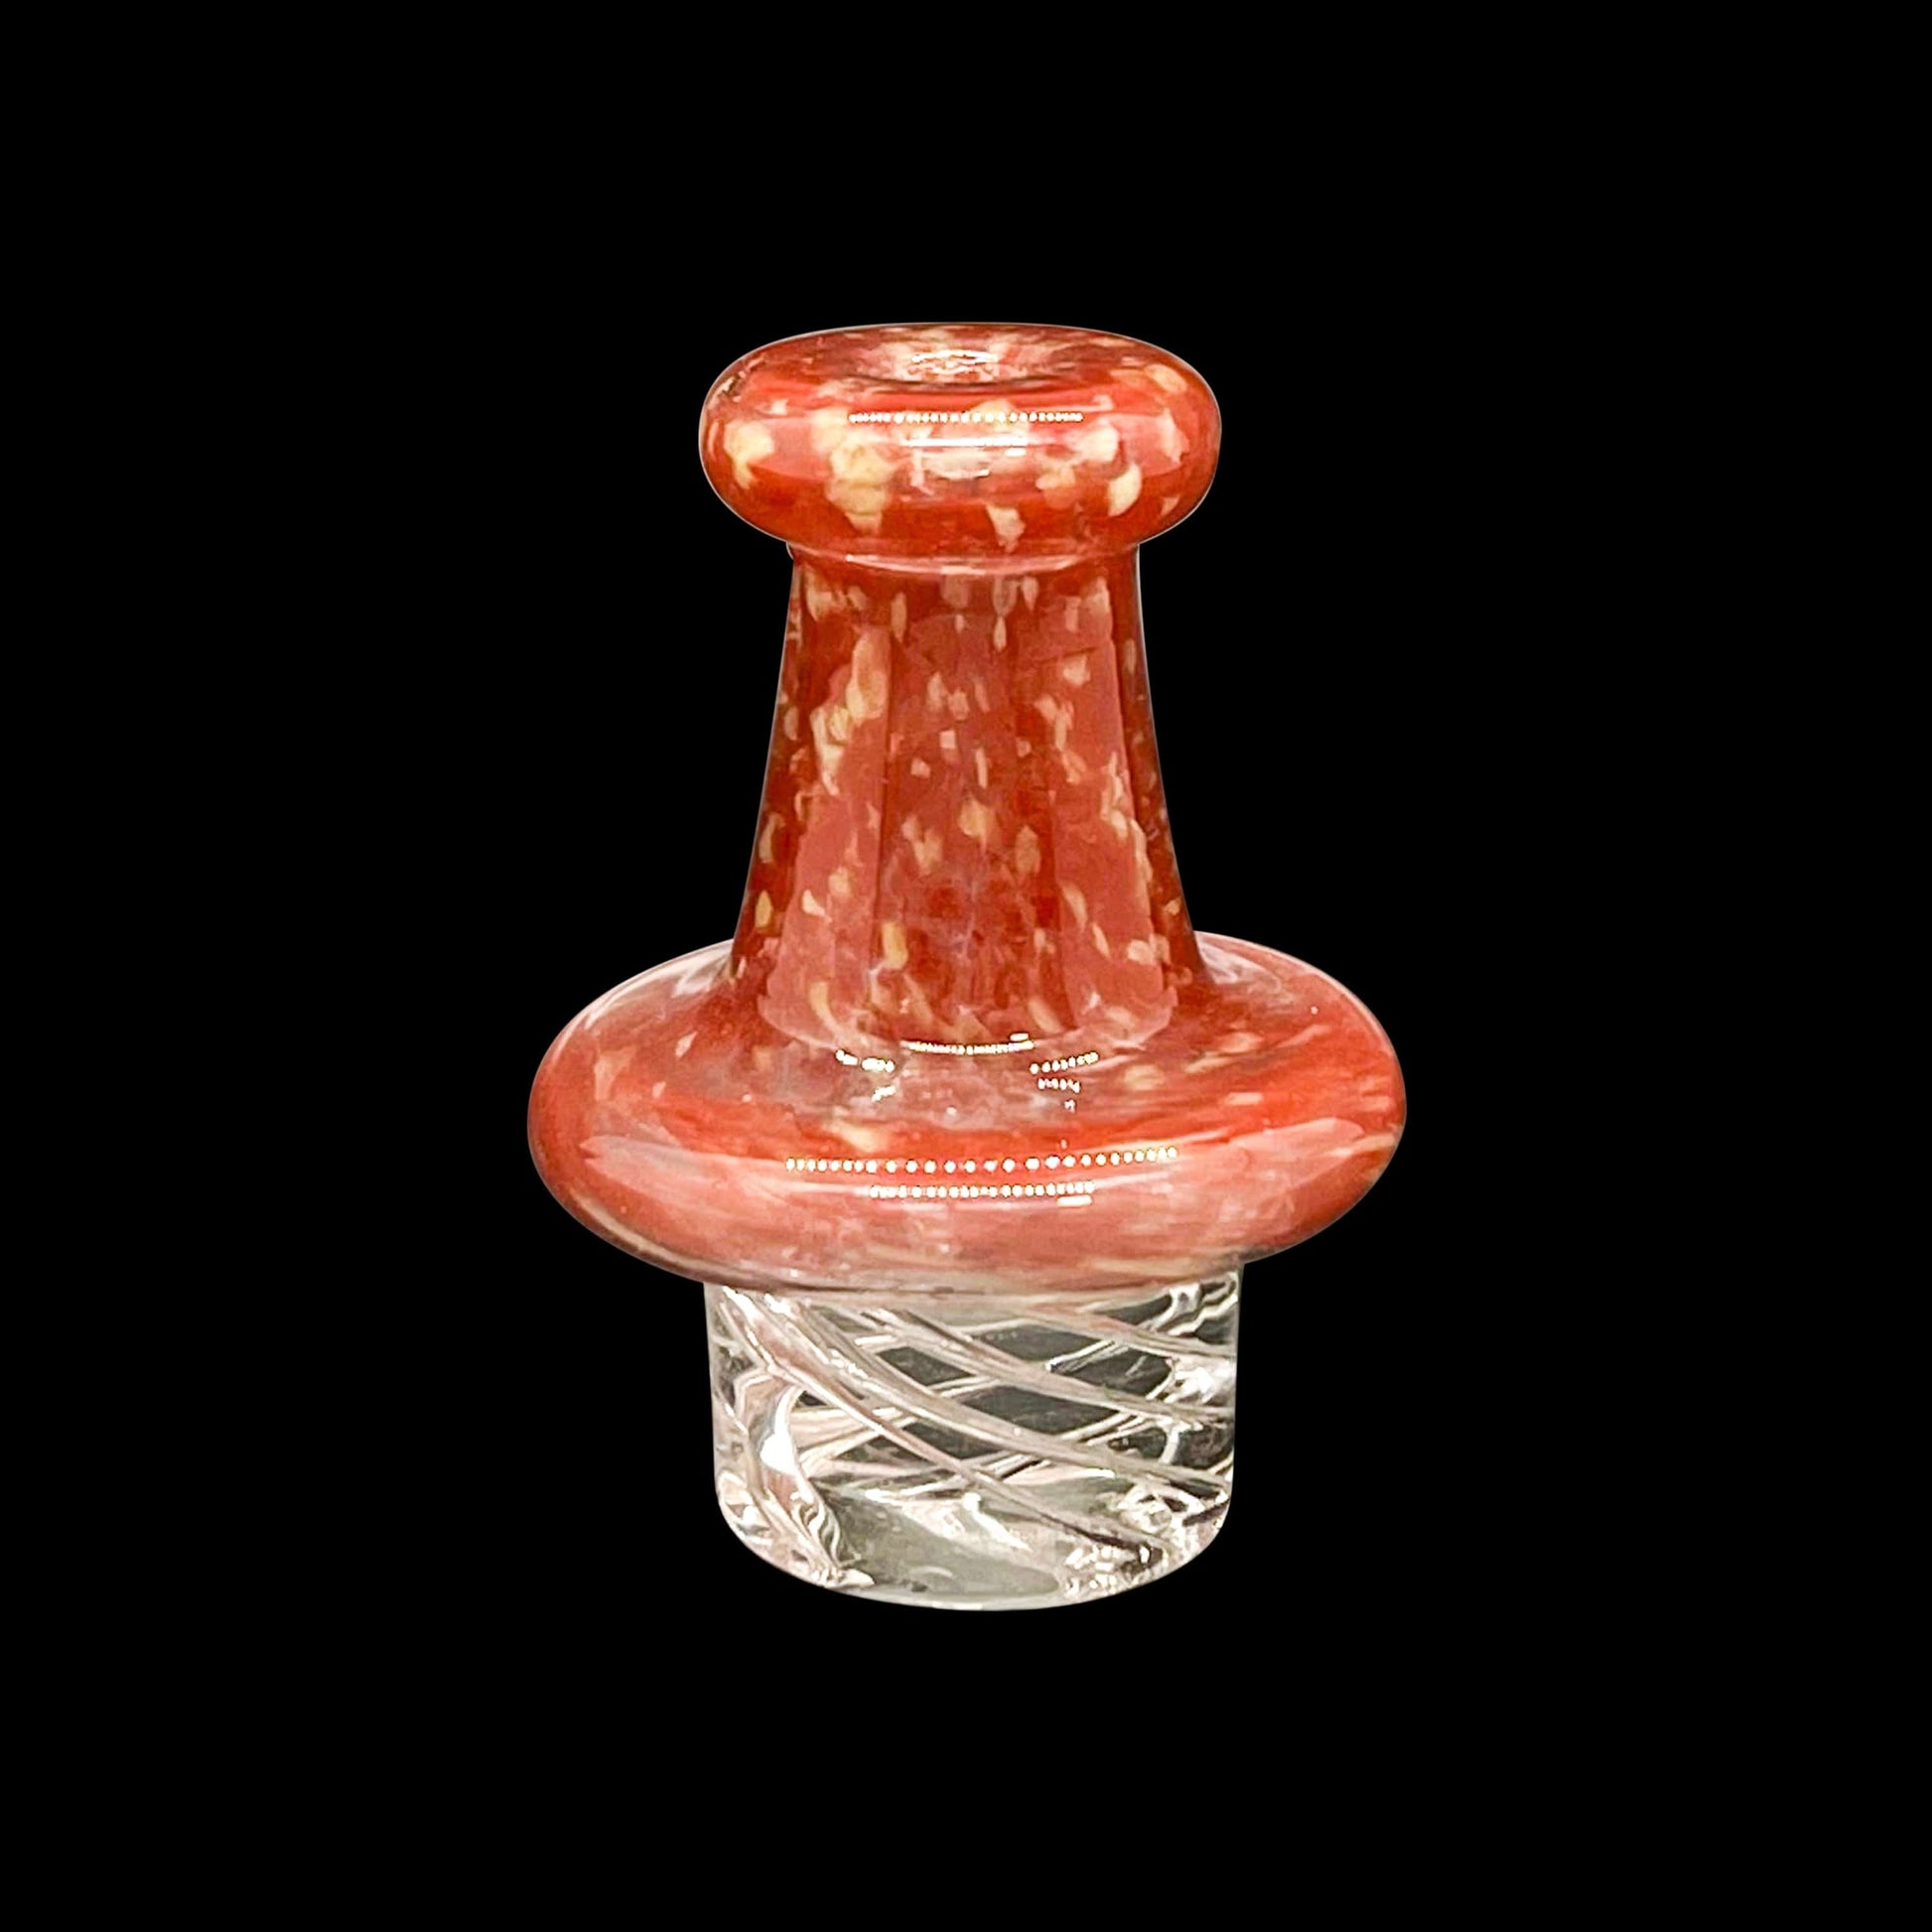 On Point Smoke - Red Koi N Silo Spinning Carb Cap for 25mm Quartz Bangers - OPS.com